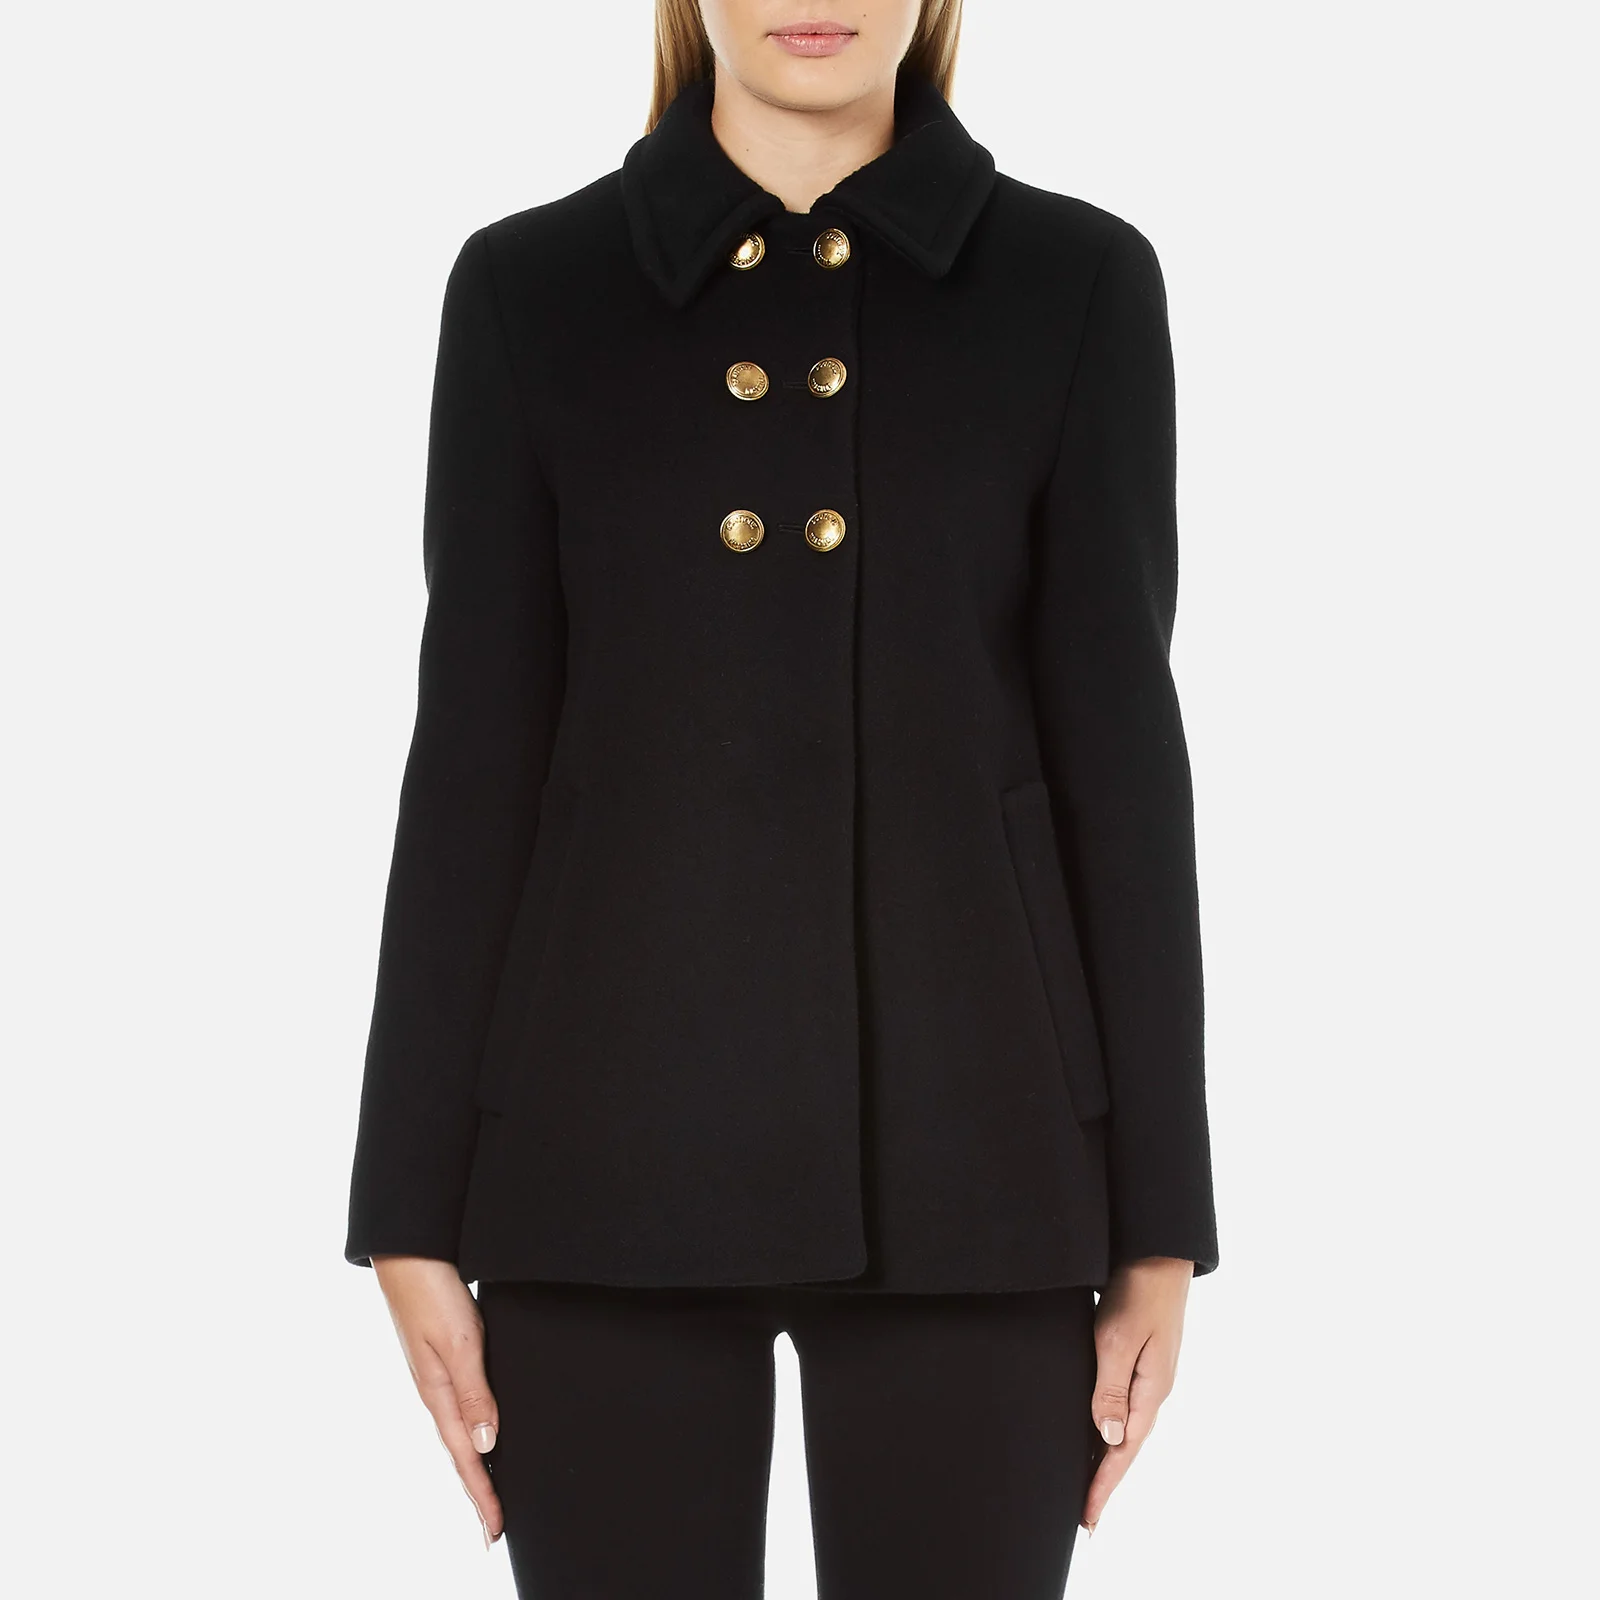 Boutique Moschino Women's Pea Coat with Gold Buttons - Black Image 1